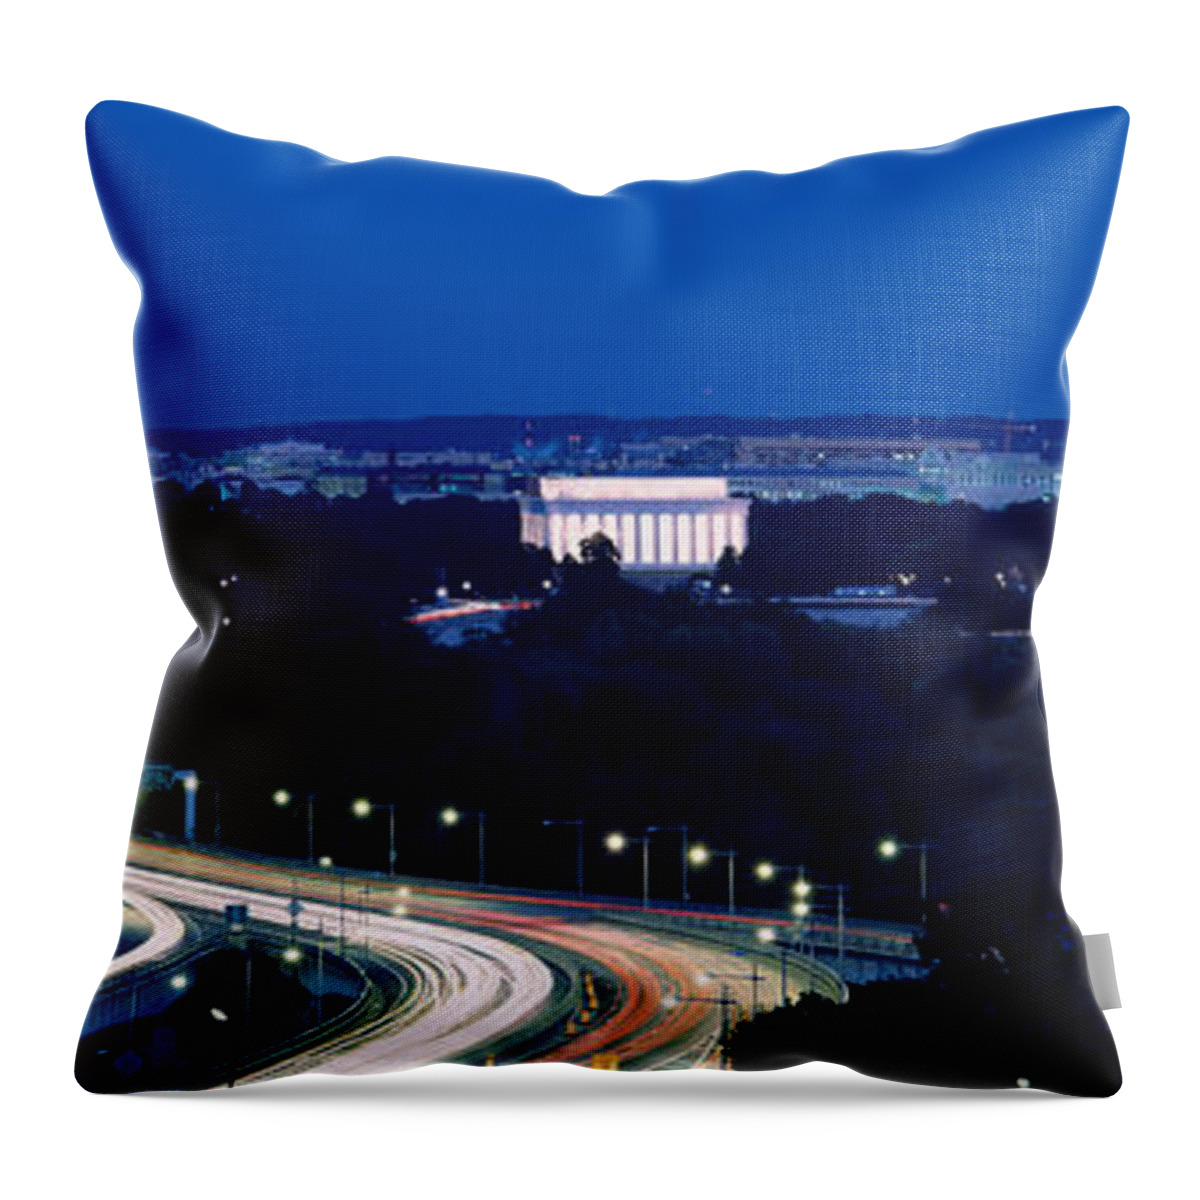 Photography Throw Pillow featuring the photograph Traffic On The Road, Washington by Panoramic Images